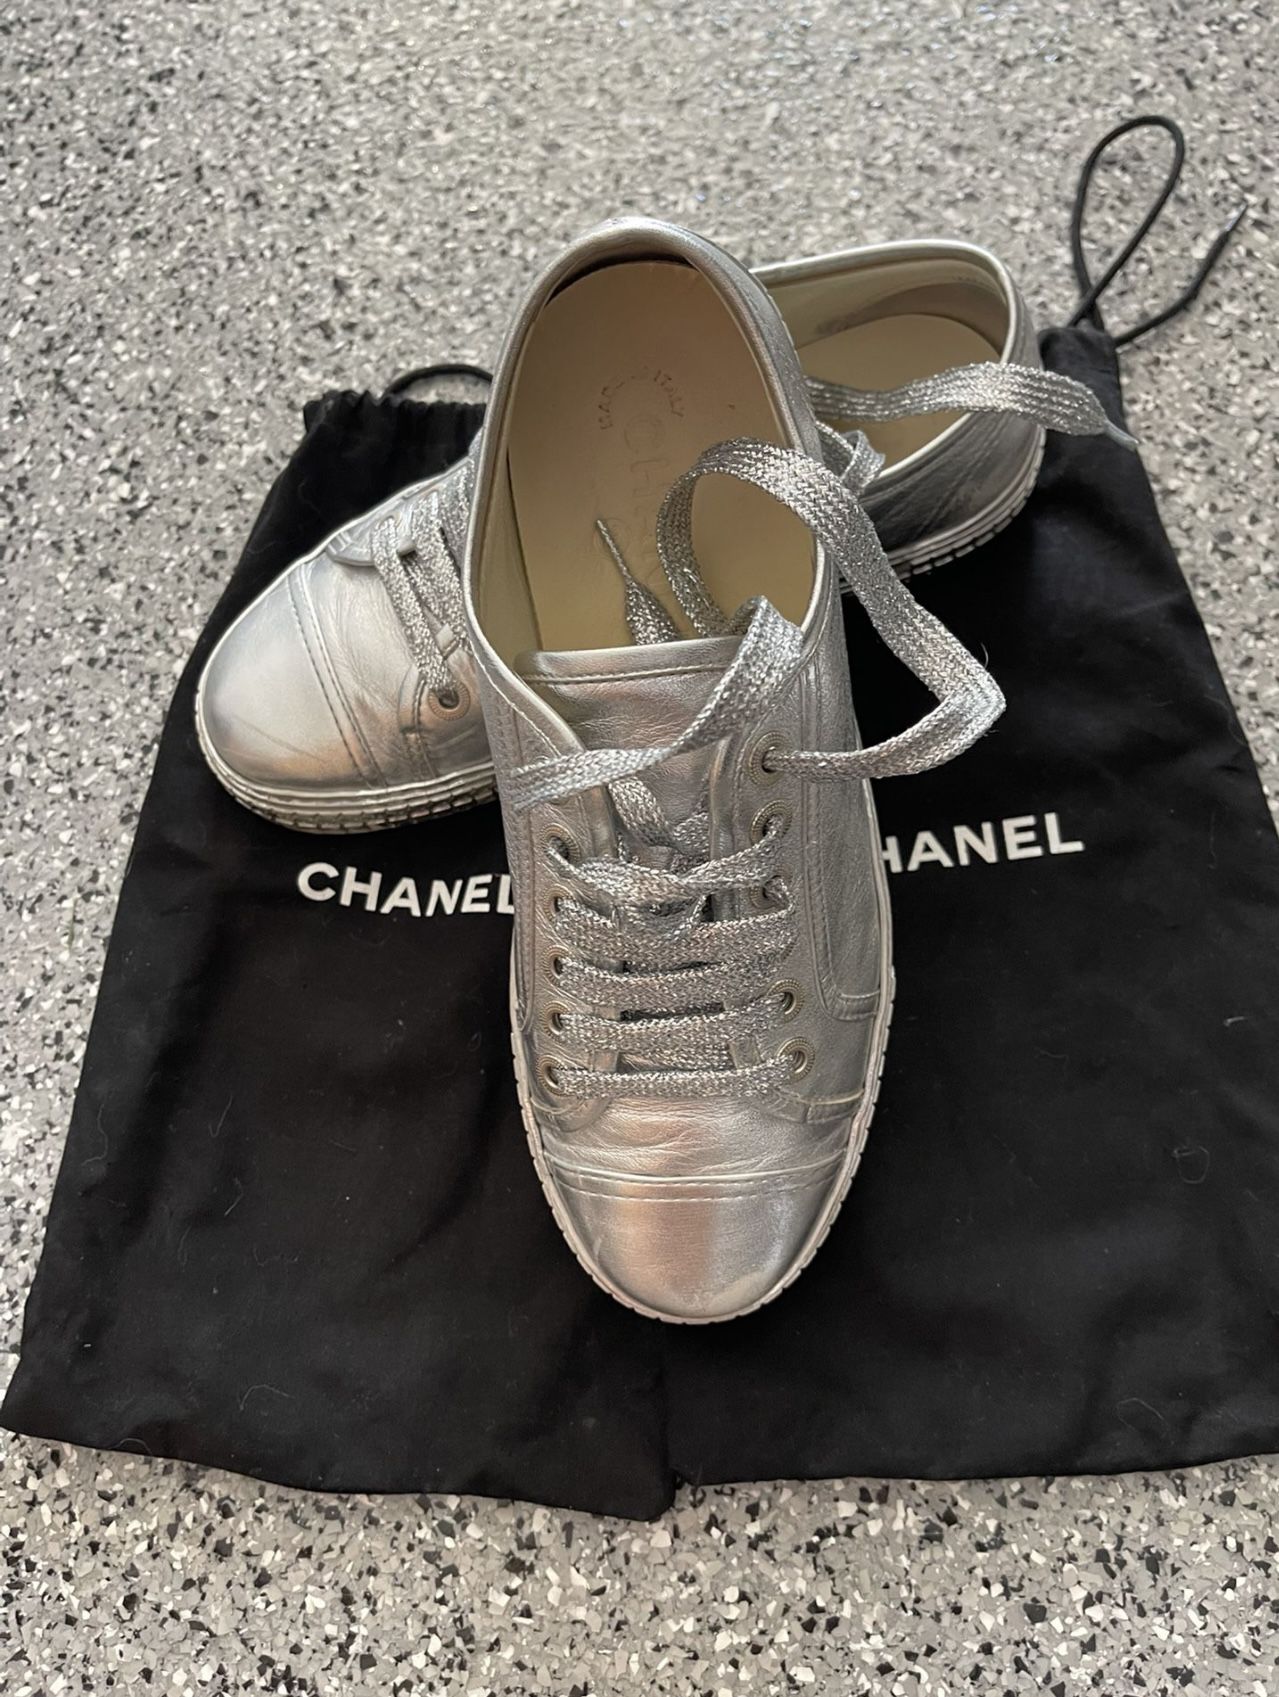 Chanel Shoes for Sale in West Hollywood, CA - OfferUp